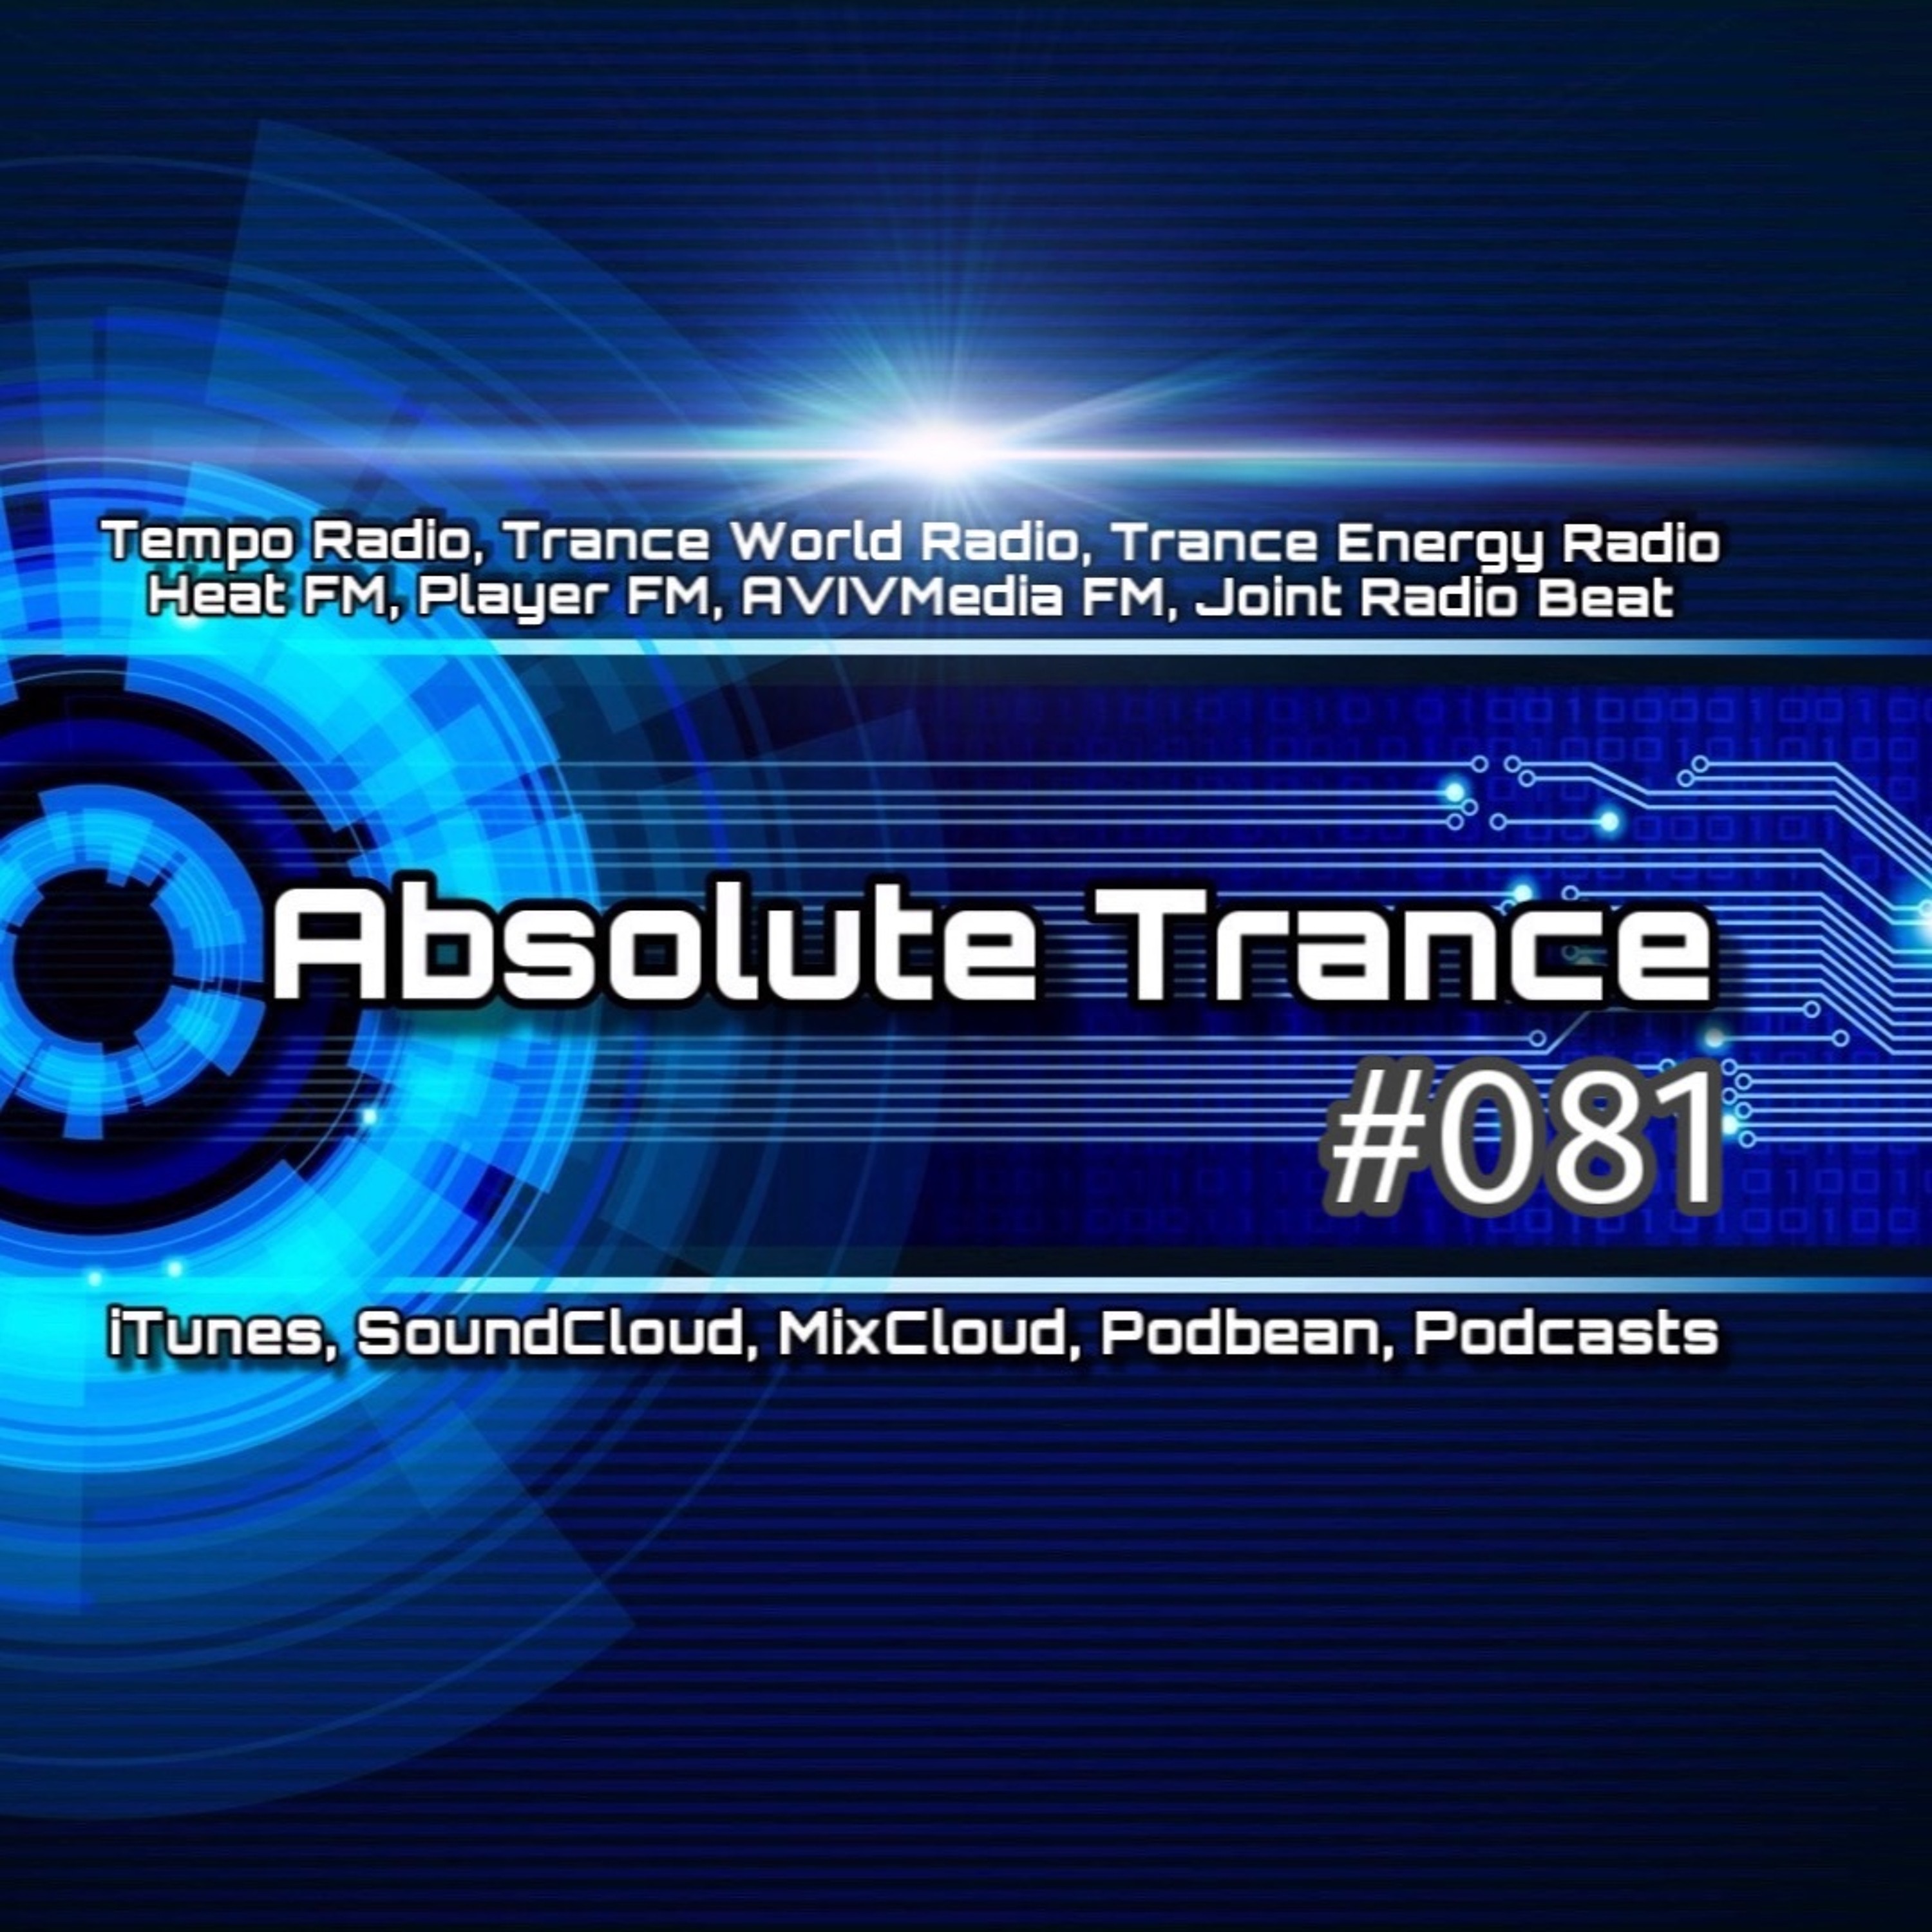 Absolute Trance #081